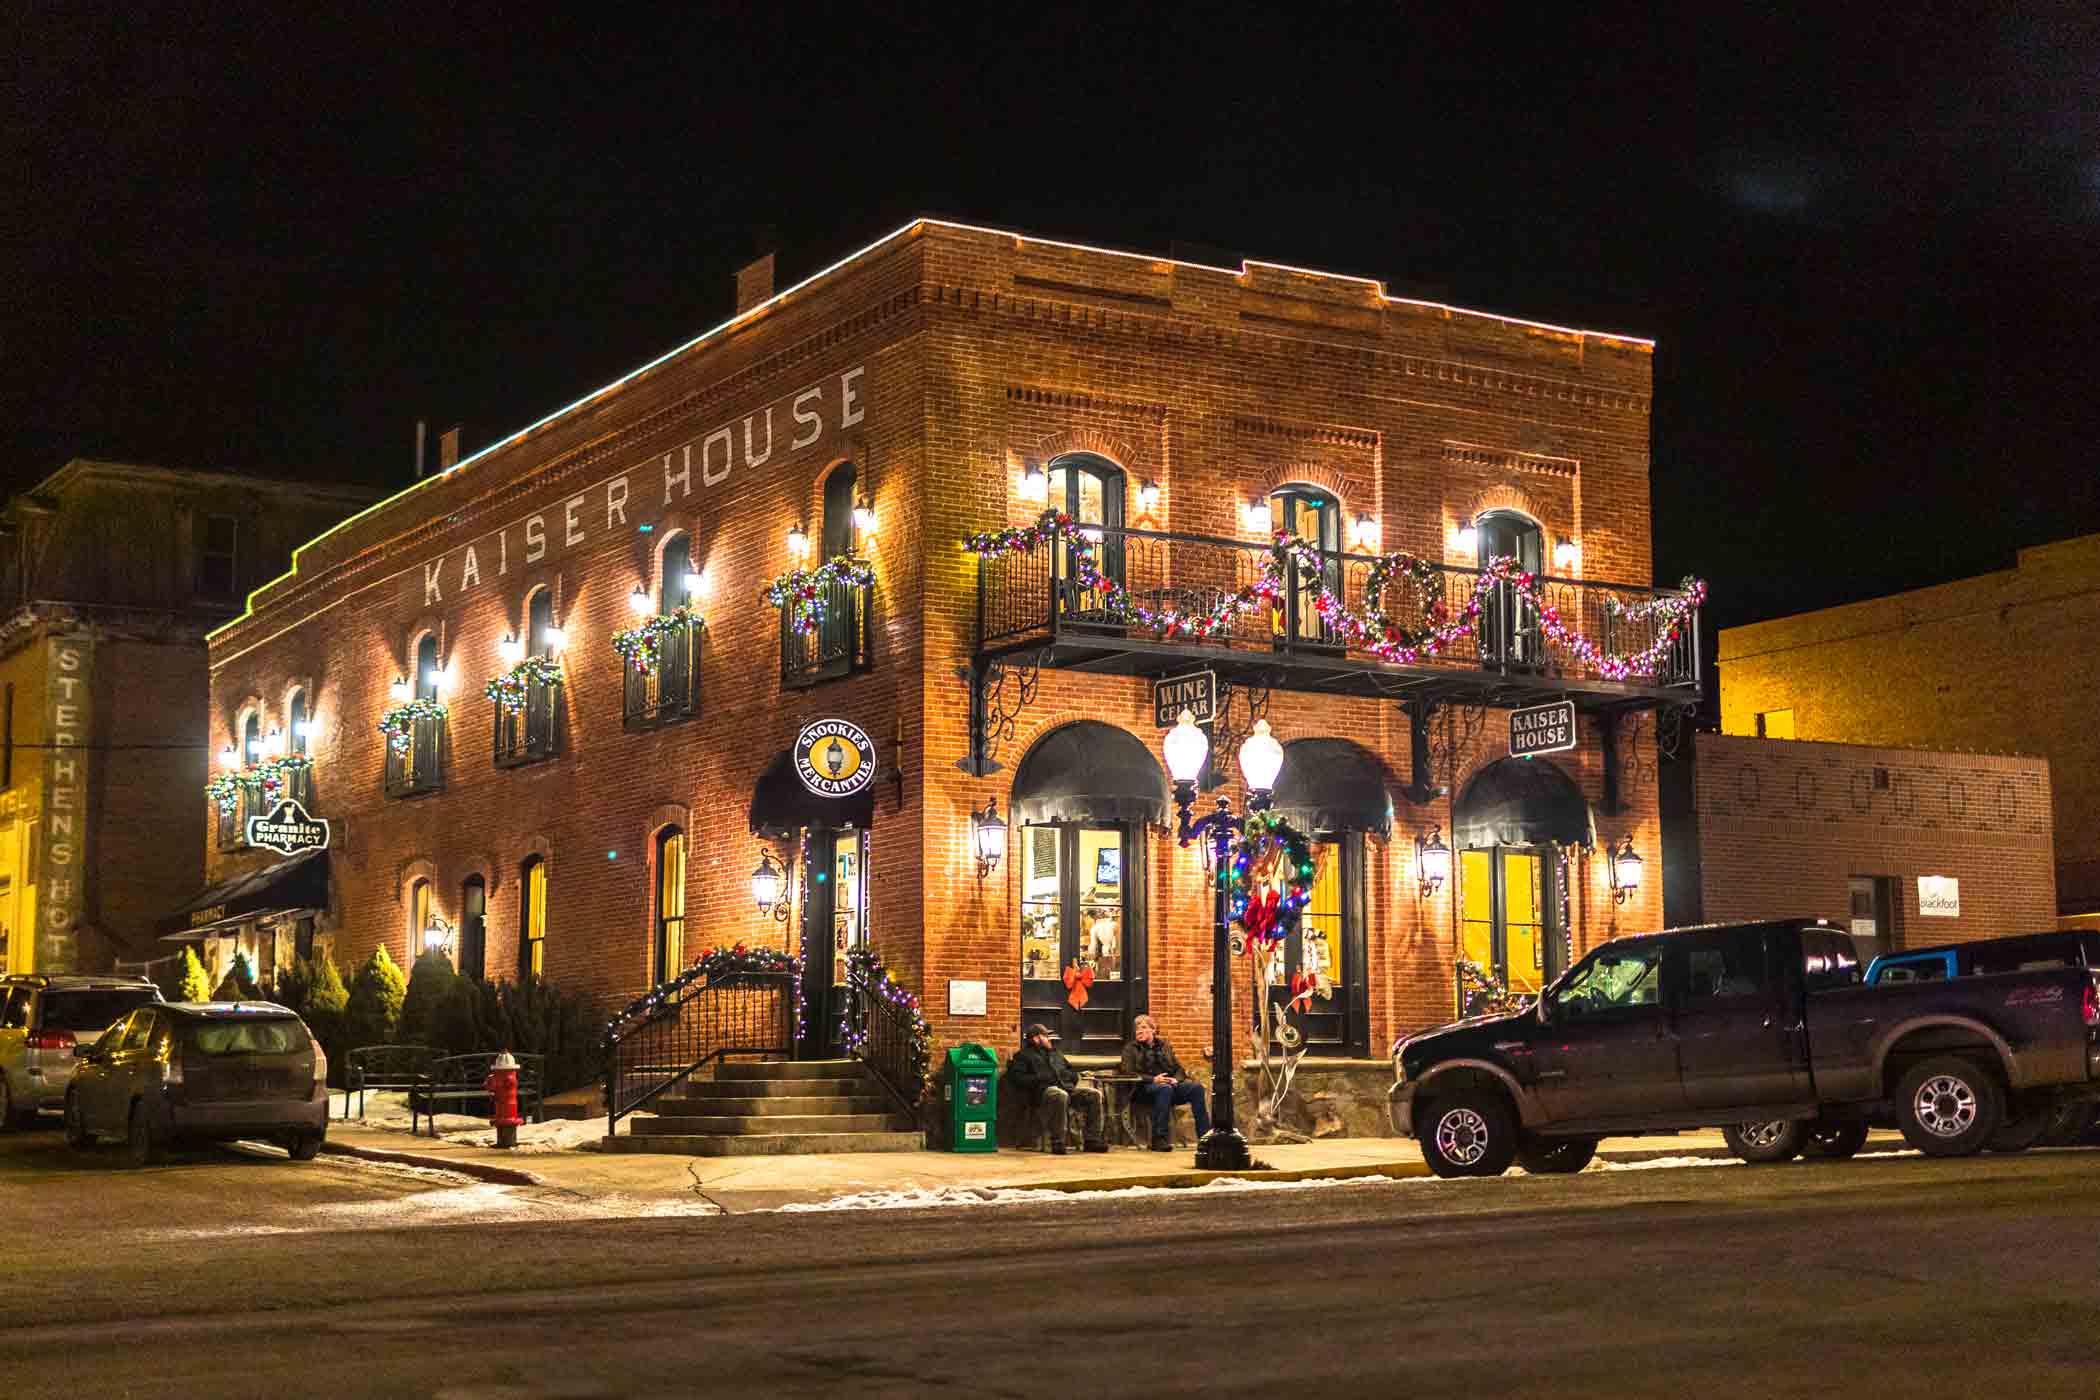 Kaiser House Hotel in Winter during the holidays in Philipsburg, Montana.